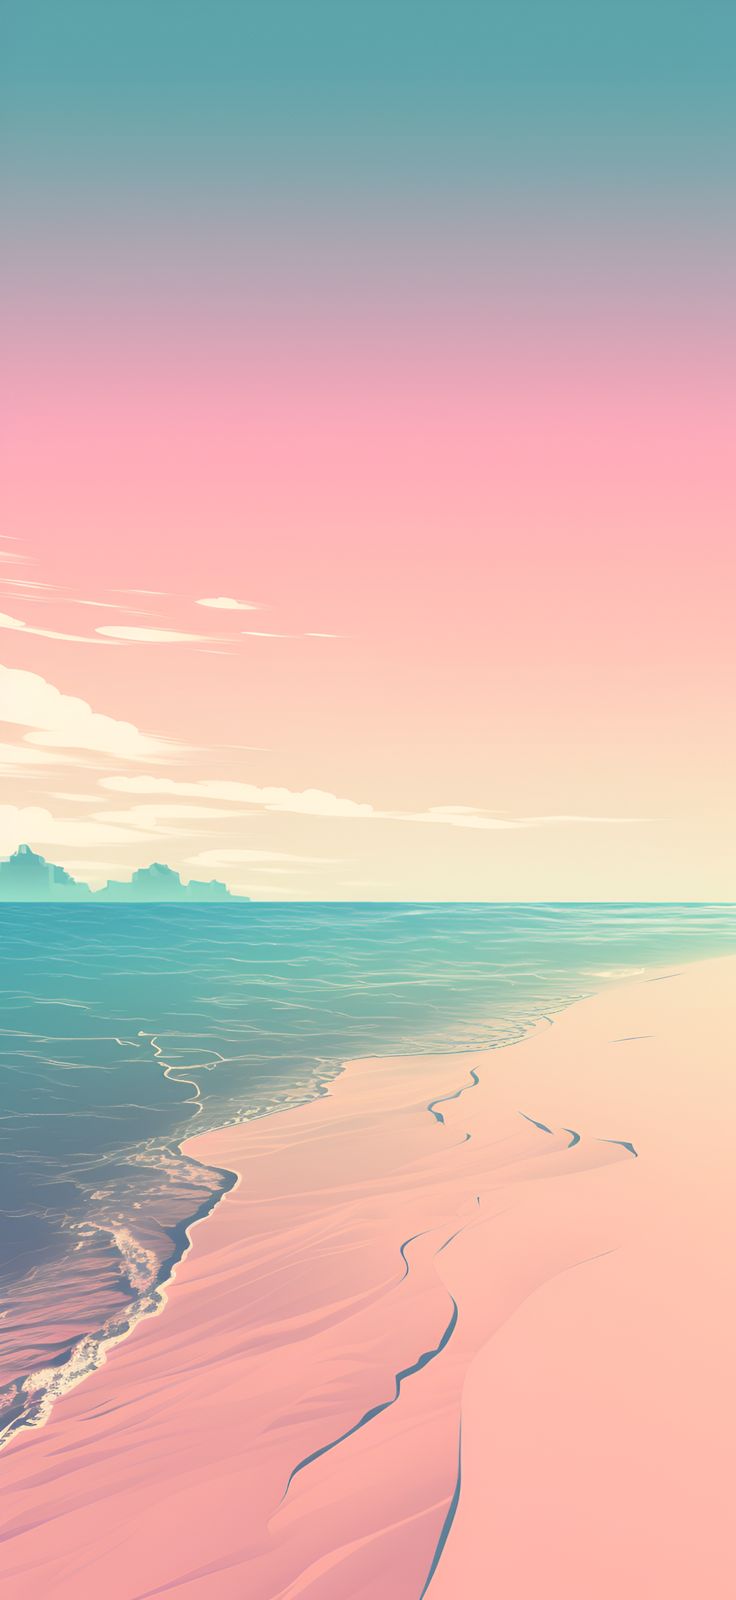 Aesthetic Wallpaper iPhone and Android Optimized: Spellbinding Pink and Blue Beach Vista. Pretty wallpaper, Pretty wallpaper iphone, Aesthetic wallpaper